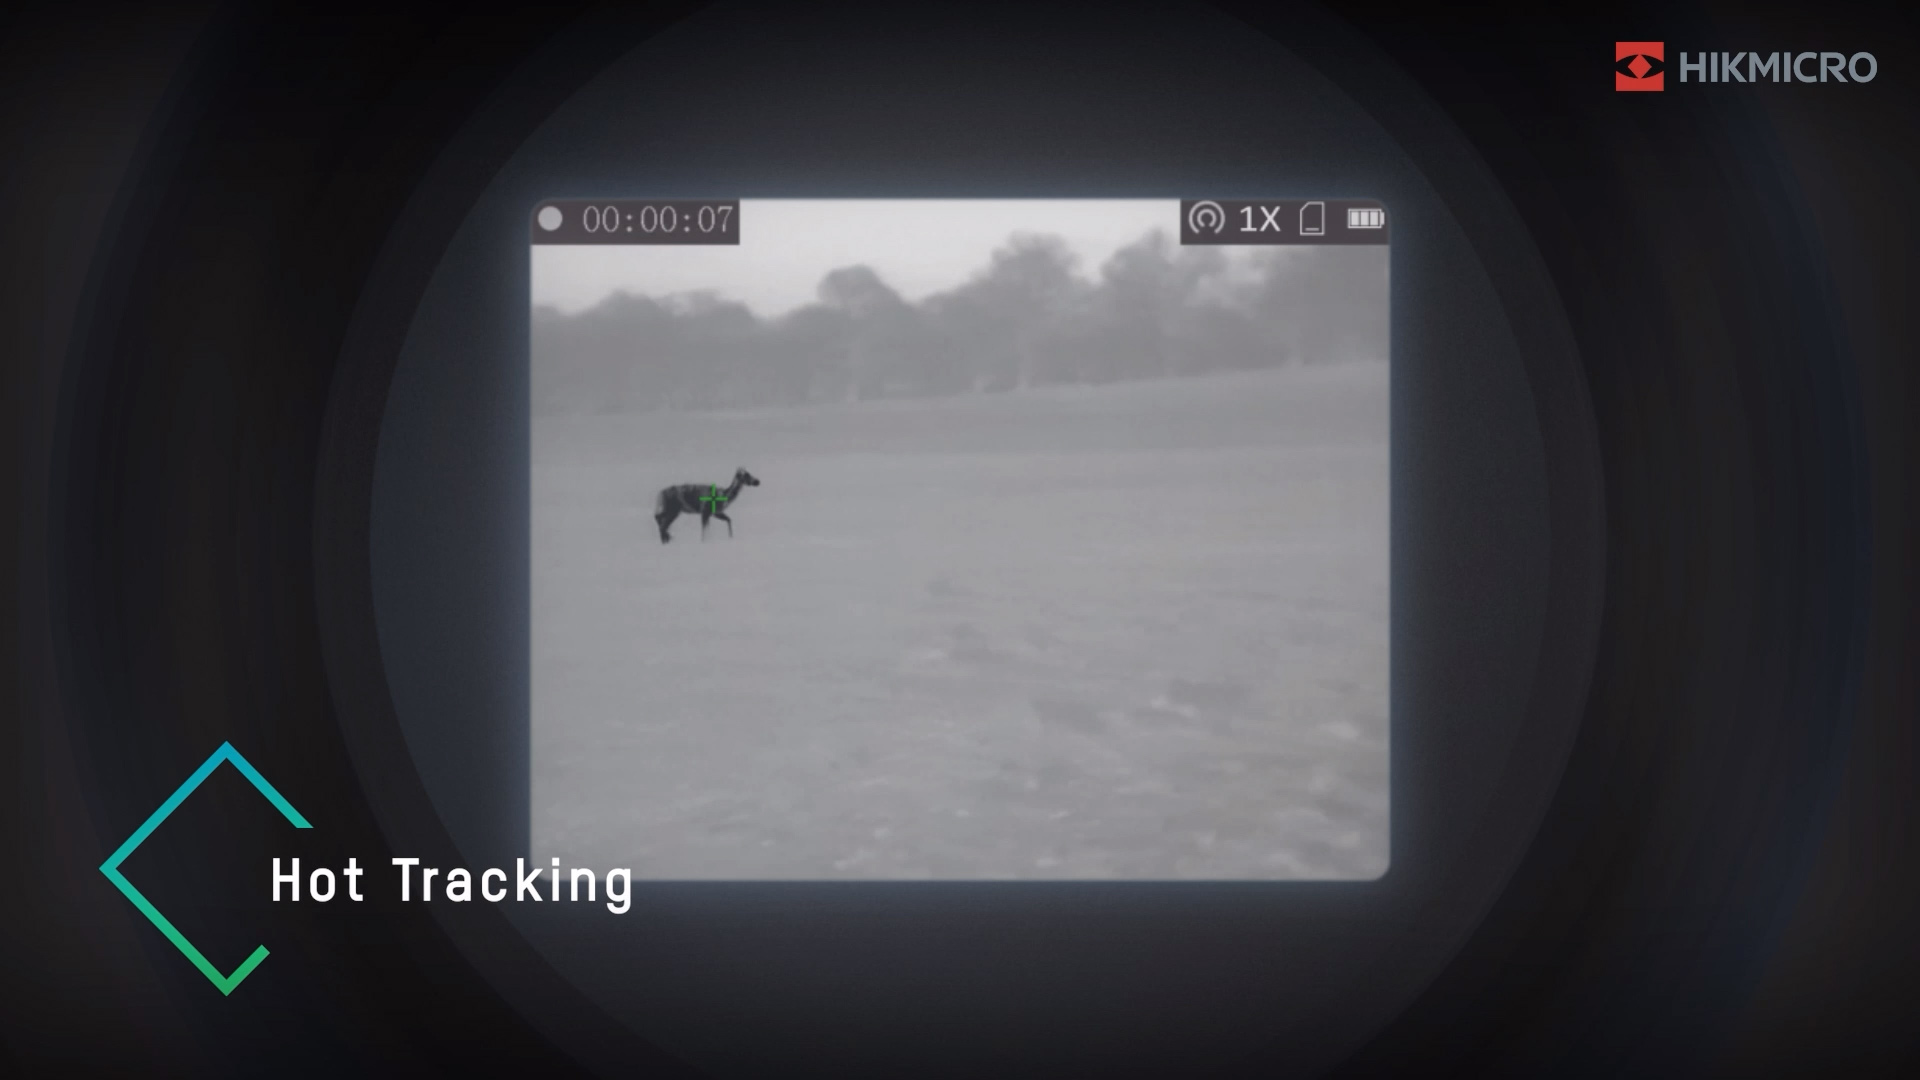 Hikmicro Lynx Pro LE10 Thermal Imaging Monocular hot tracking feature is highlighted by tracking an animal, looks like a dog.